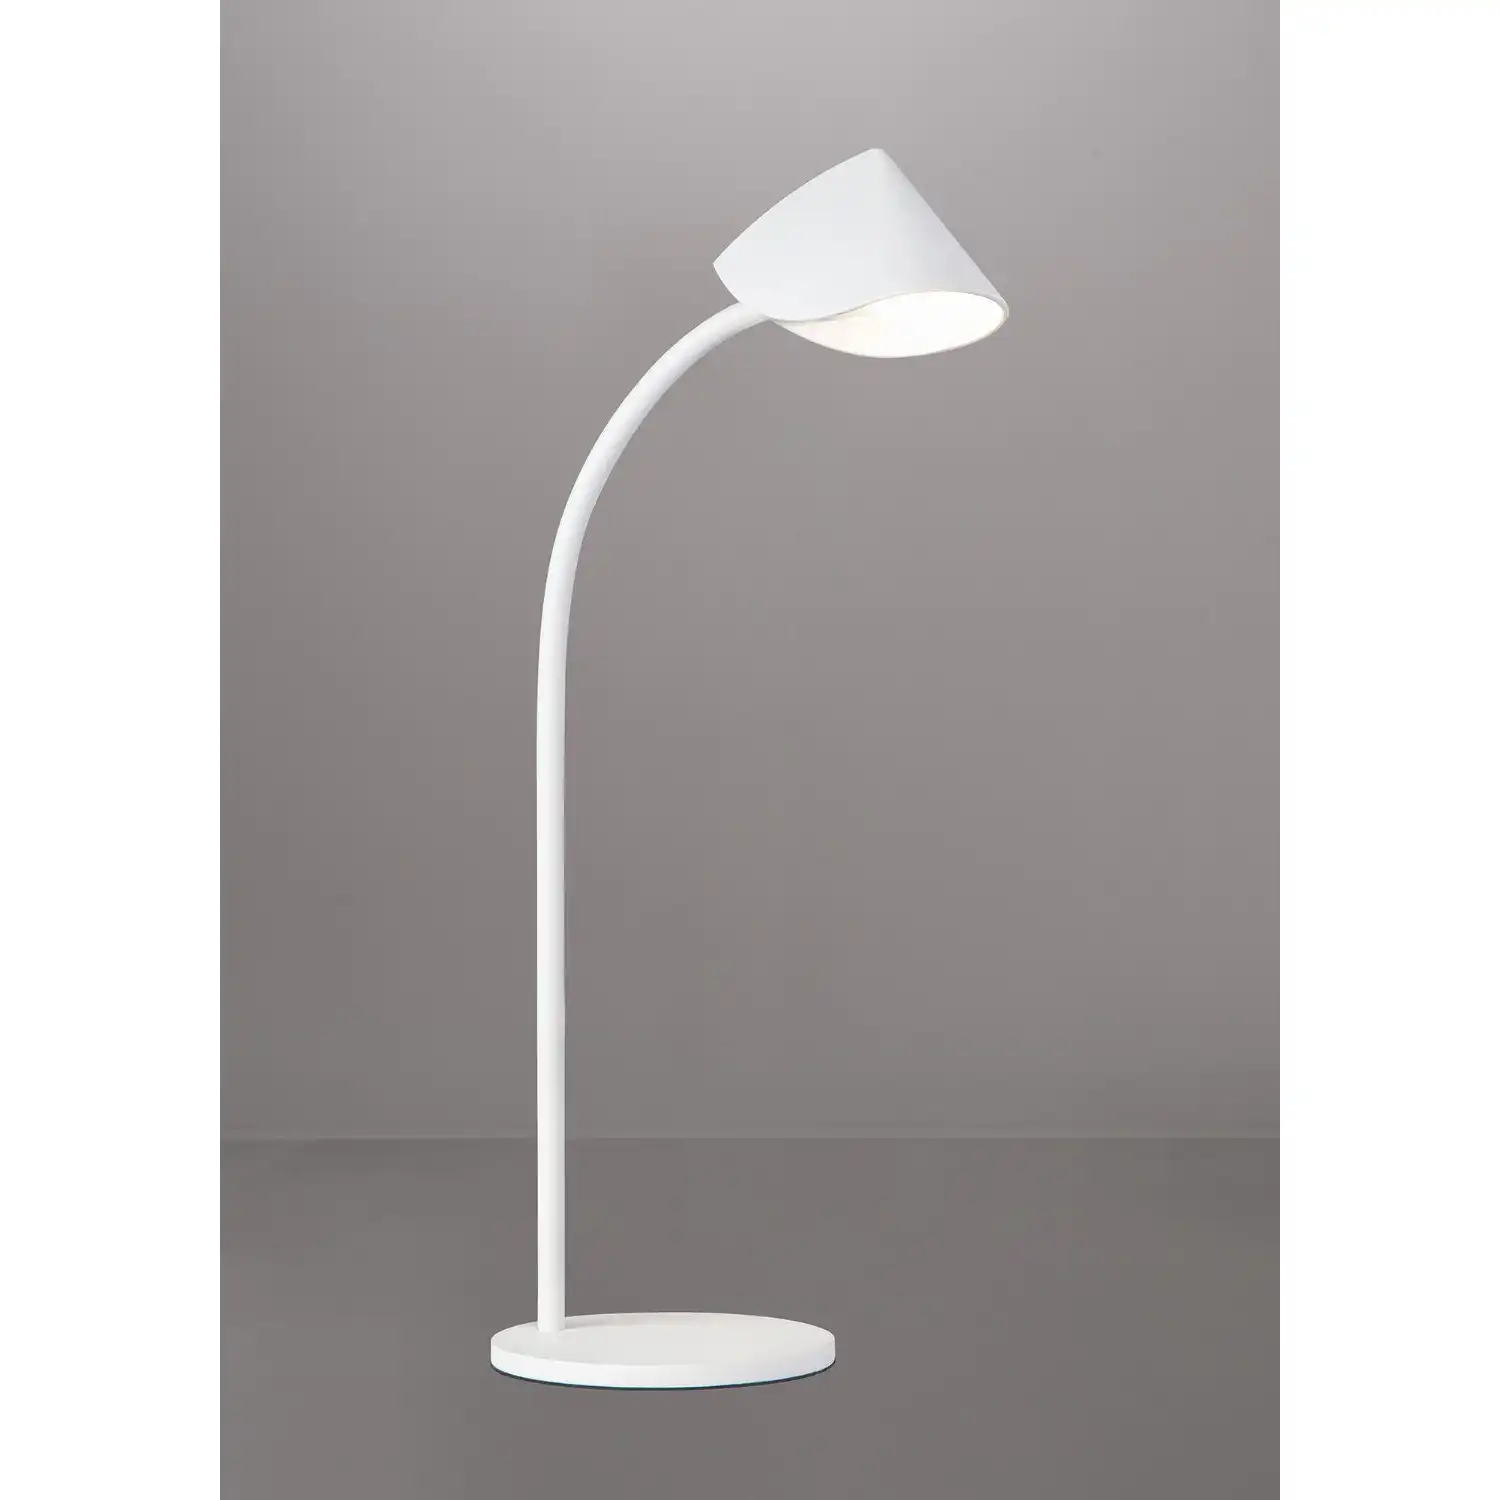 Capuccina Large 1 Light Table Lamp, 8.5W LED, 3000K, 610lm, White, 3yrs Warranty